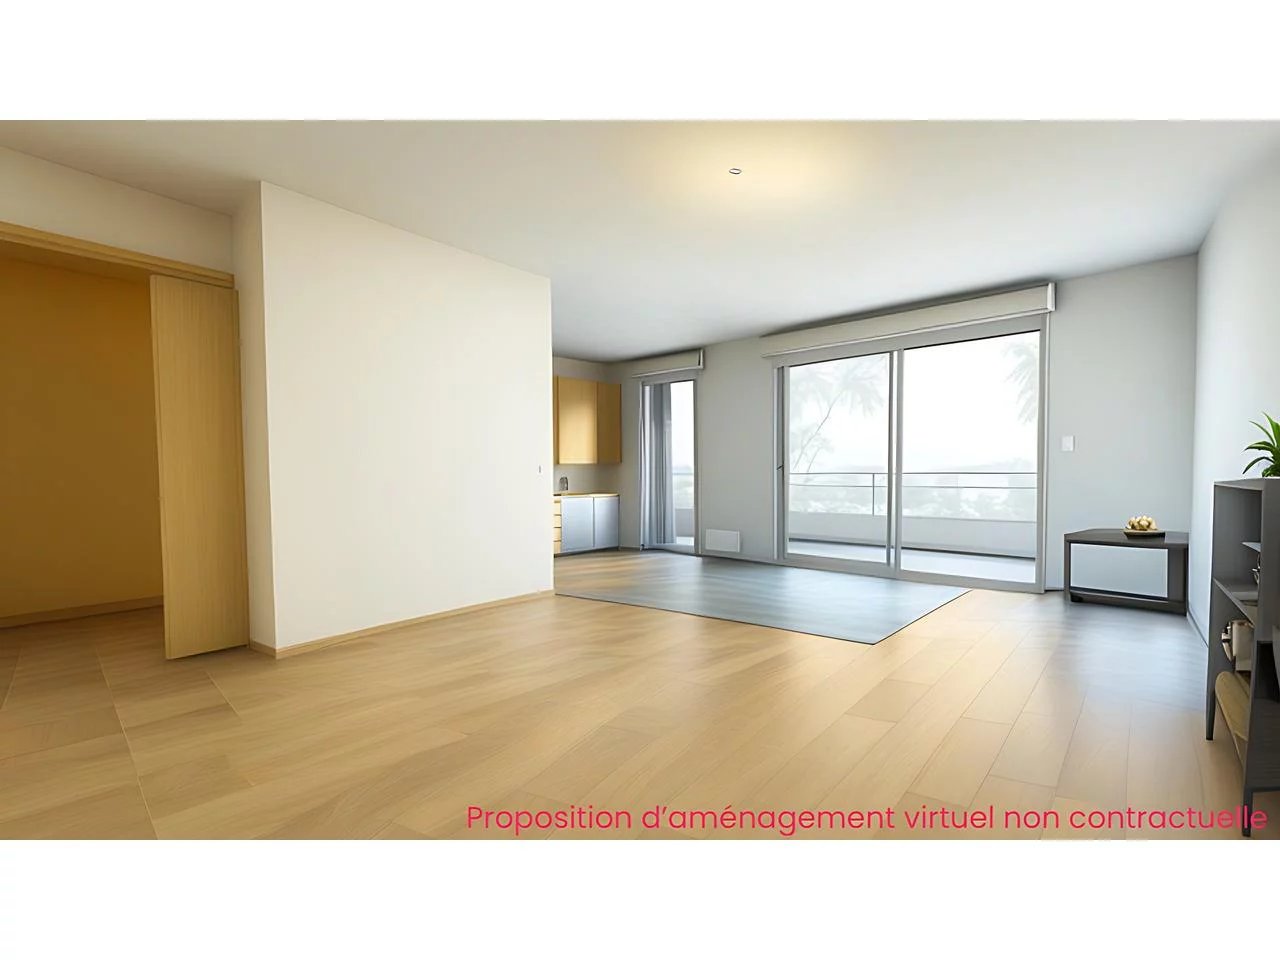 Appartement  3 Rooms 70m2  for sale   385 000 €